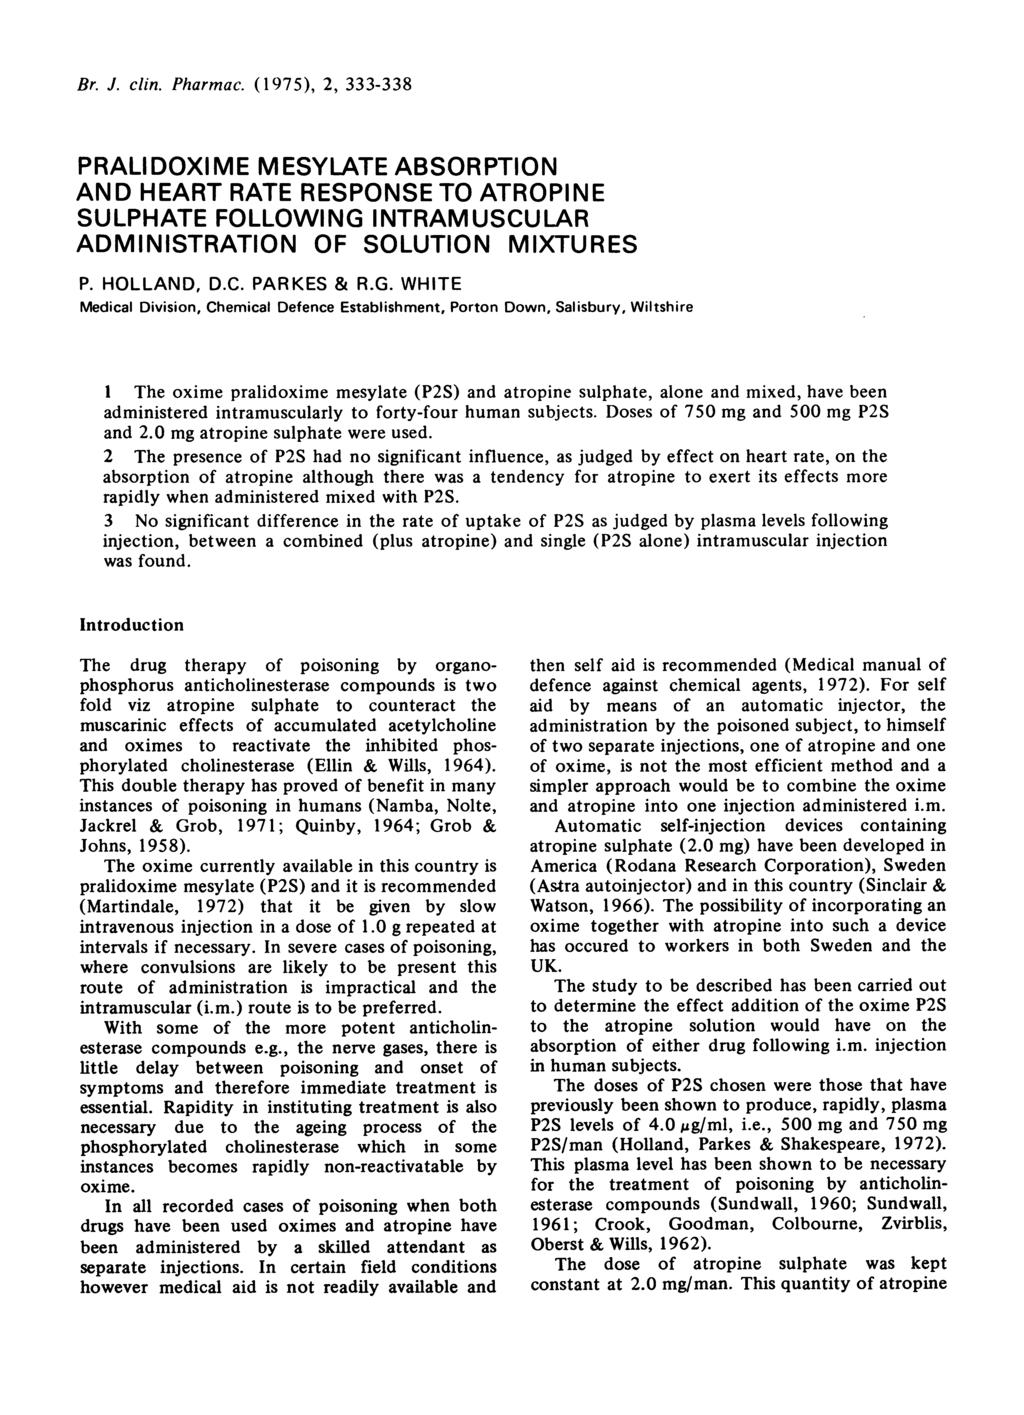 Br. J. clin. Pharmac. (1975), 2, 333-338 PRALIDOXIME MESYLATE ABSORPTION AND HEART RATE RESPONSE TO ATROPINE SULPHATE FOLLOWING INTRAMUSCULAR ADMINISTRATION OF SOLUTION MIXTURES P. HOLLAND, D.C. PARKES & R.